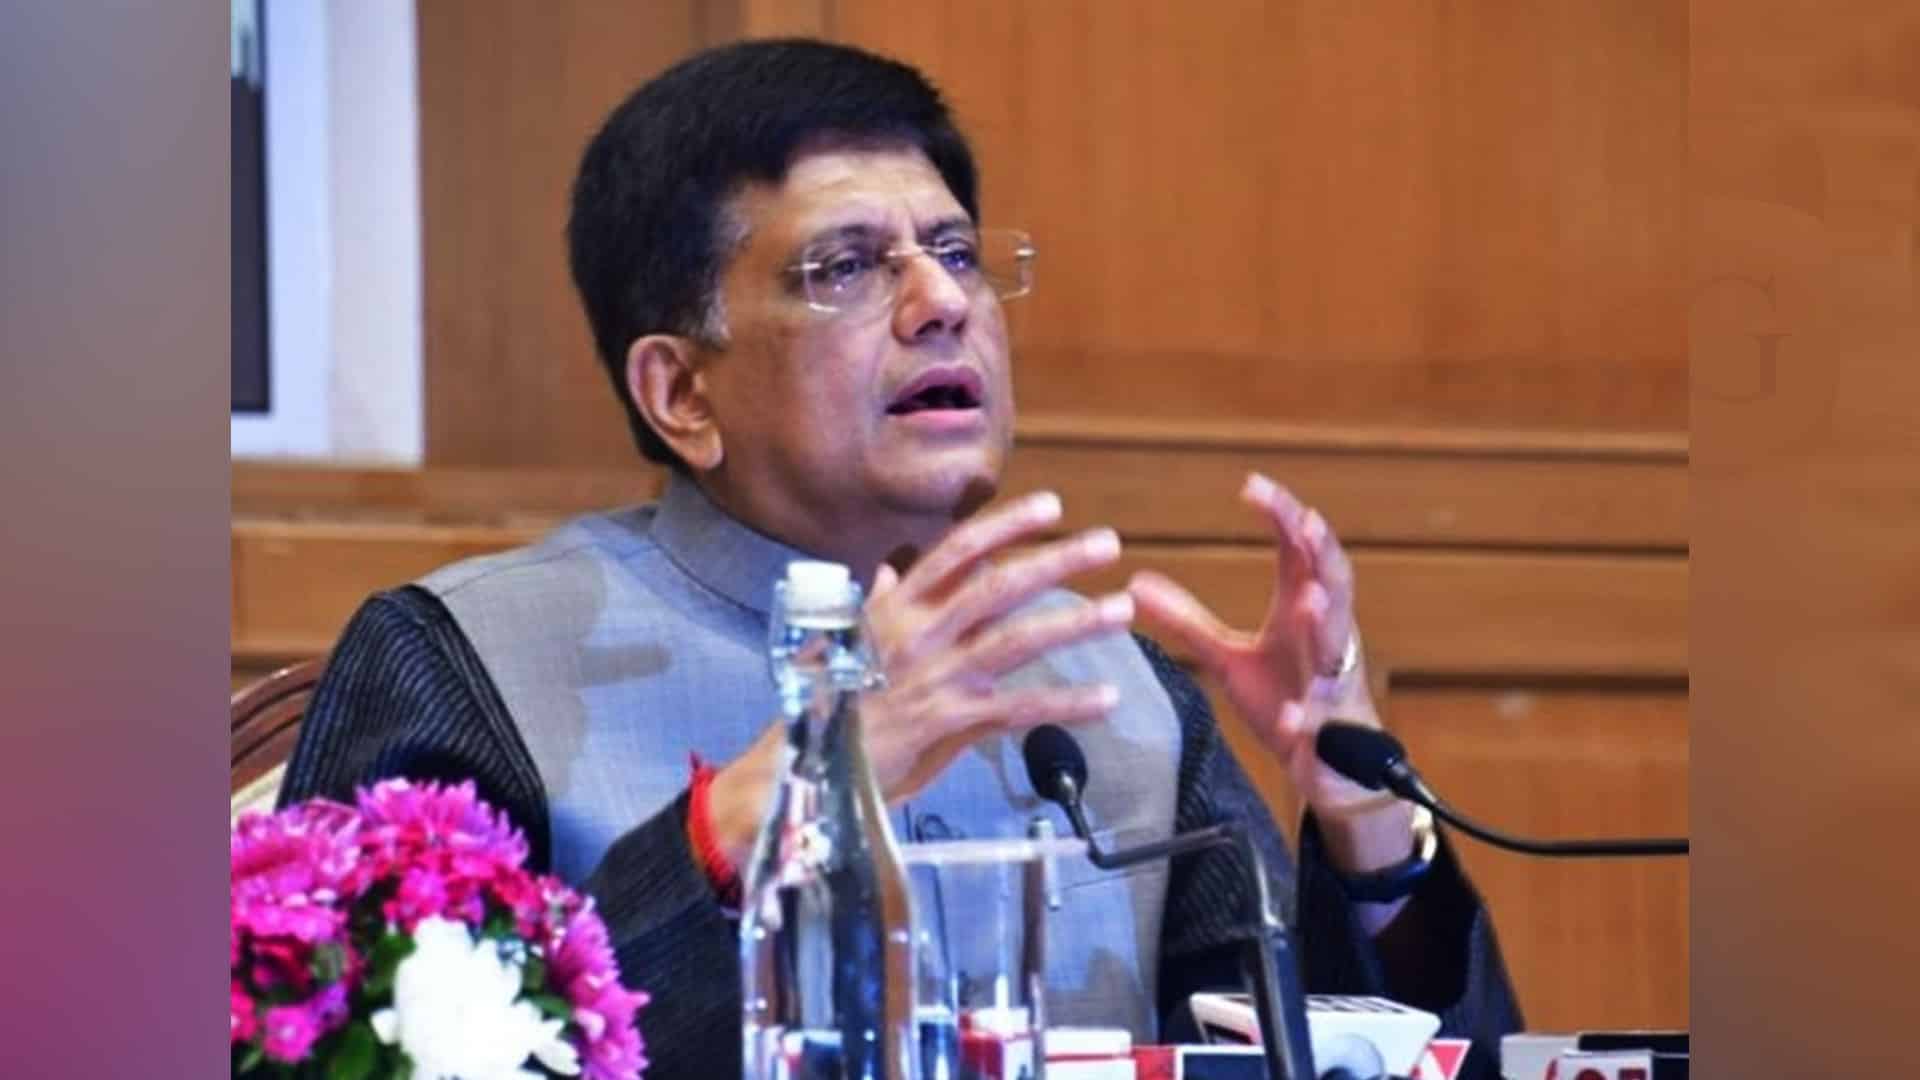 Goyal meets global leaders, pitches India among best investment destinations